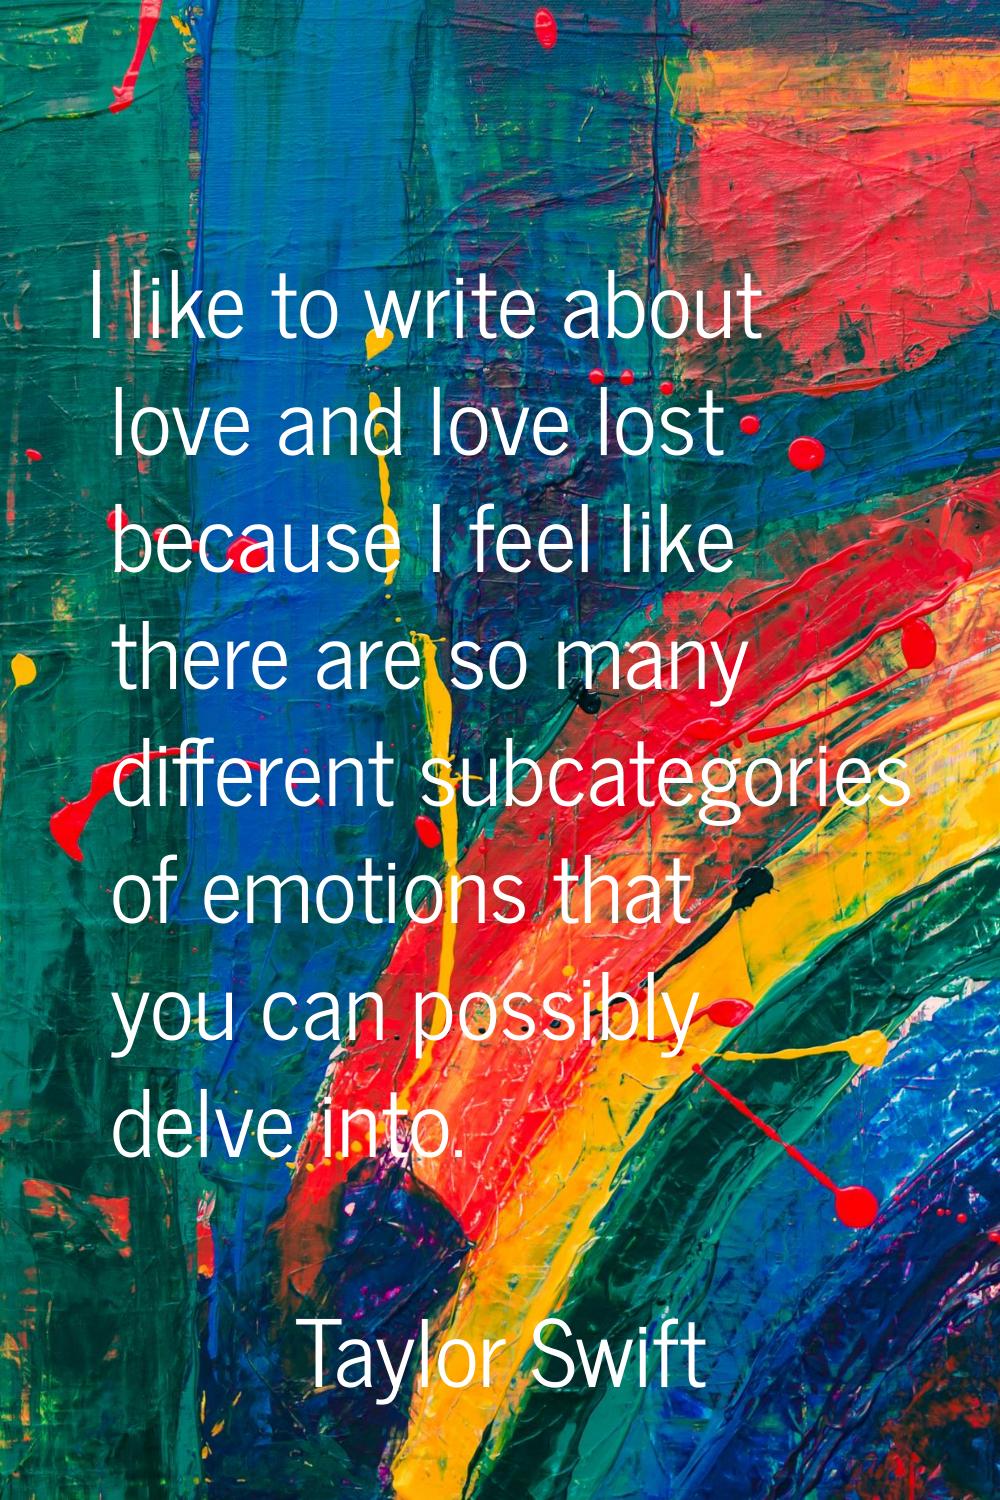 I like to write about love and love lost because I feel like there are so many different subcategor